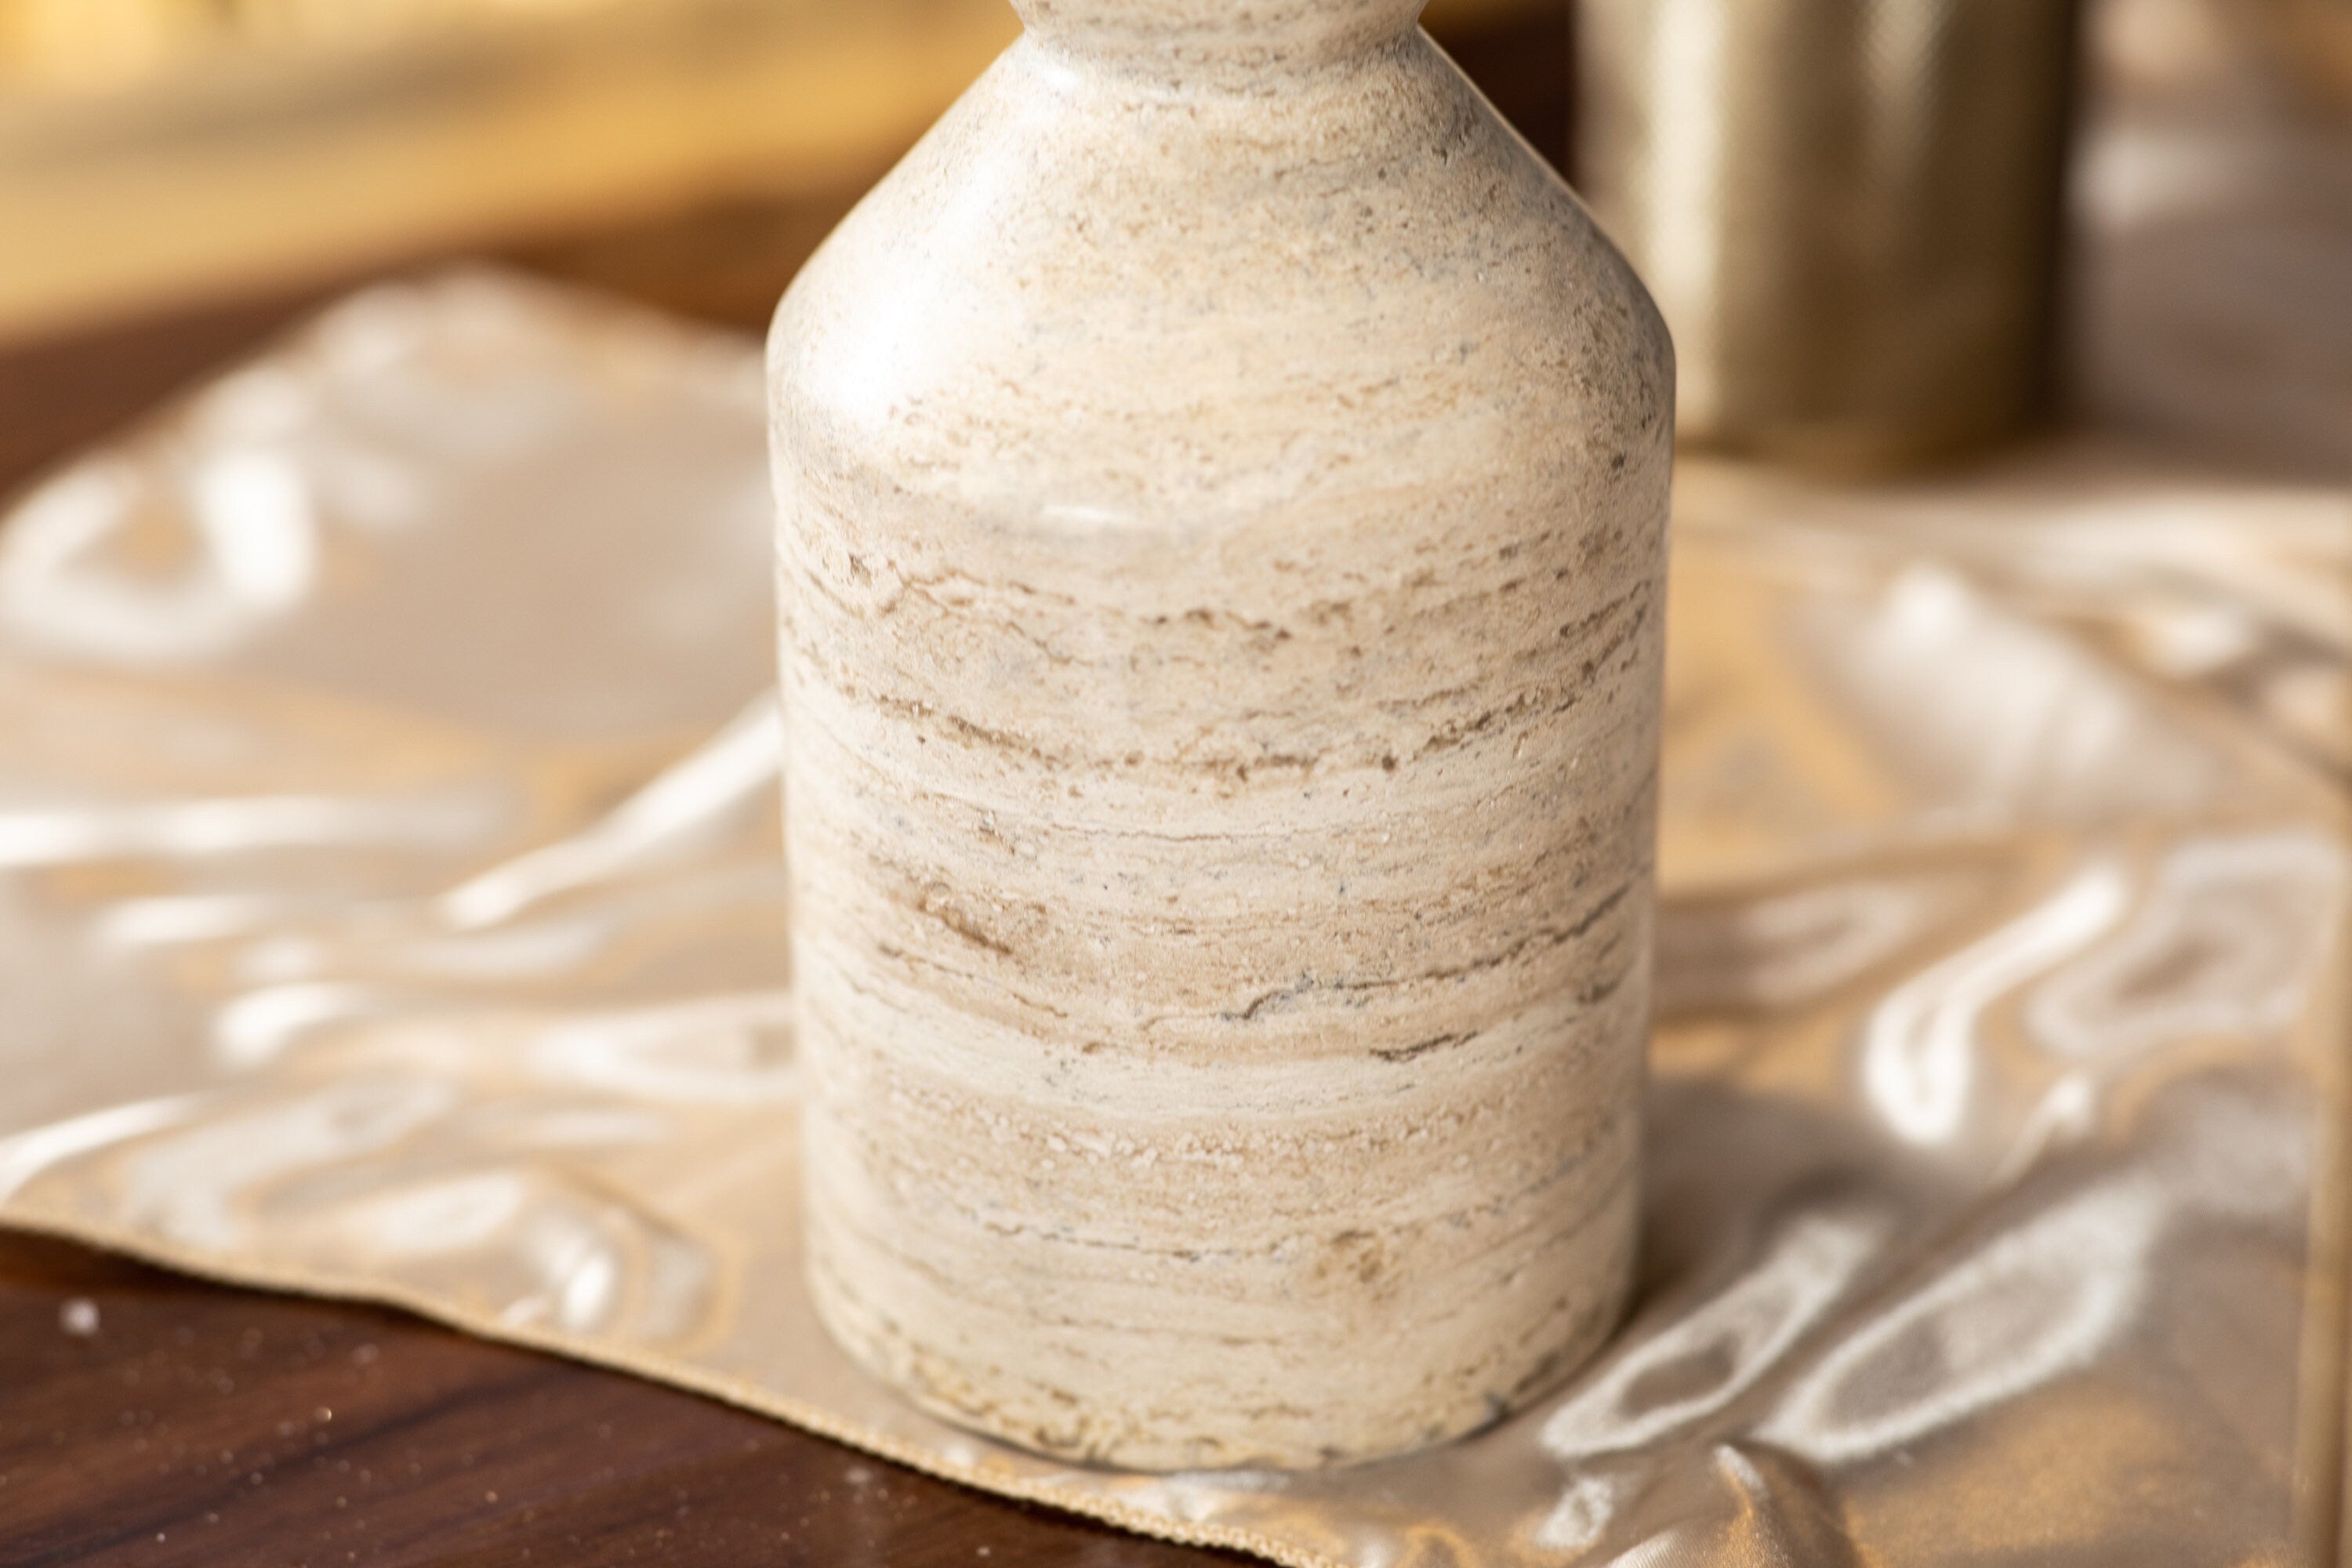 Handcrafted Vase - Real Stone - High Quality - One of a Kind Decor